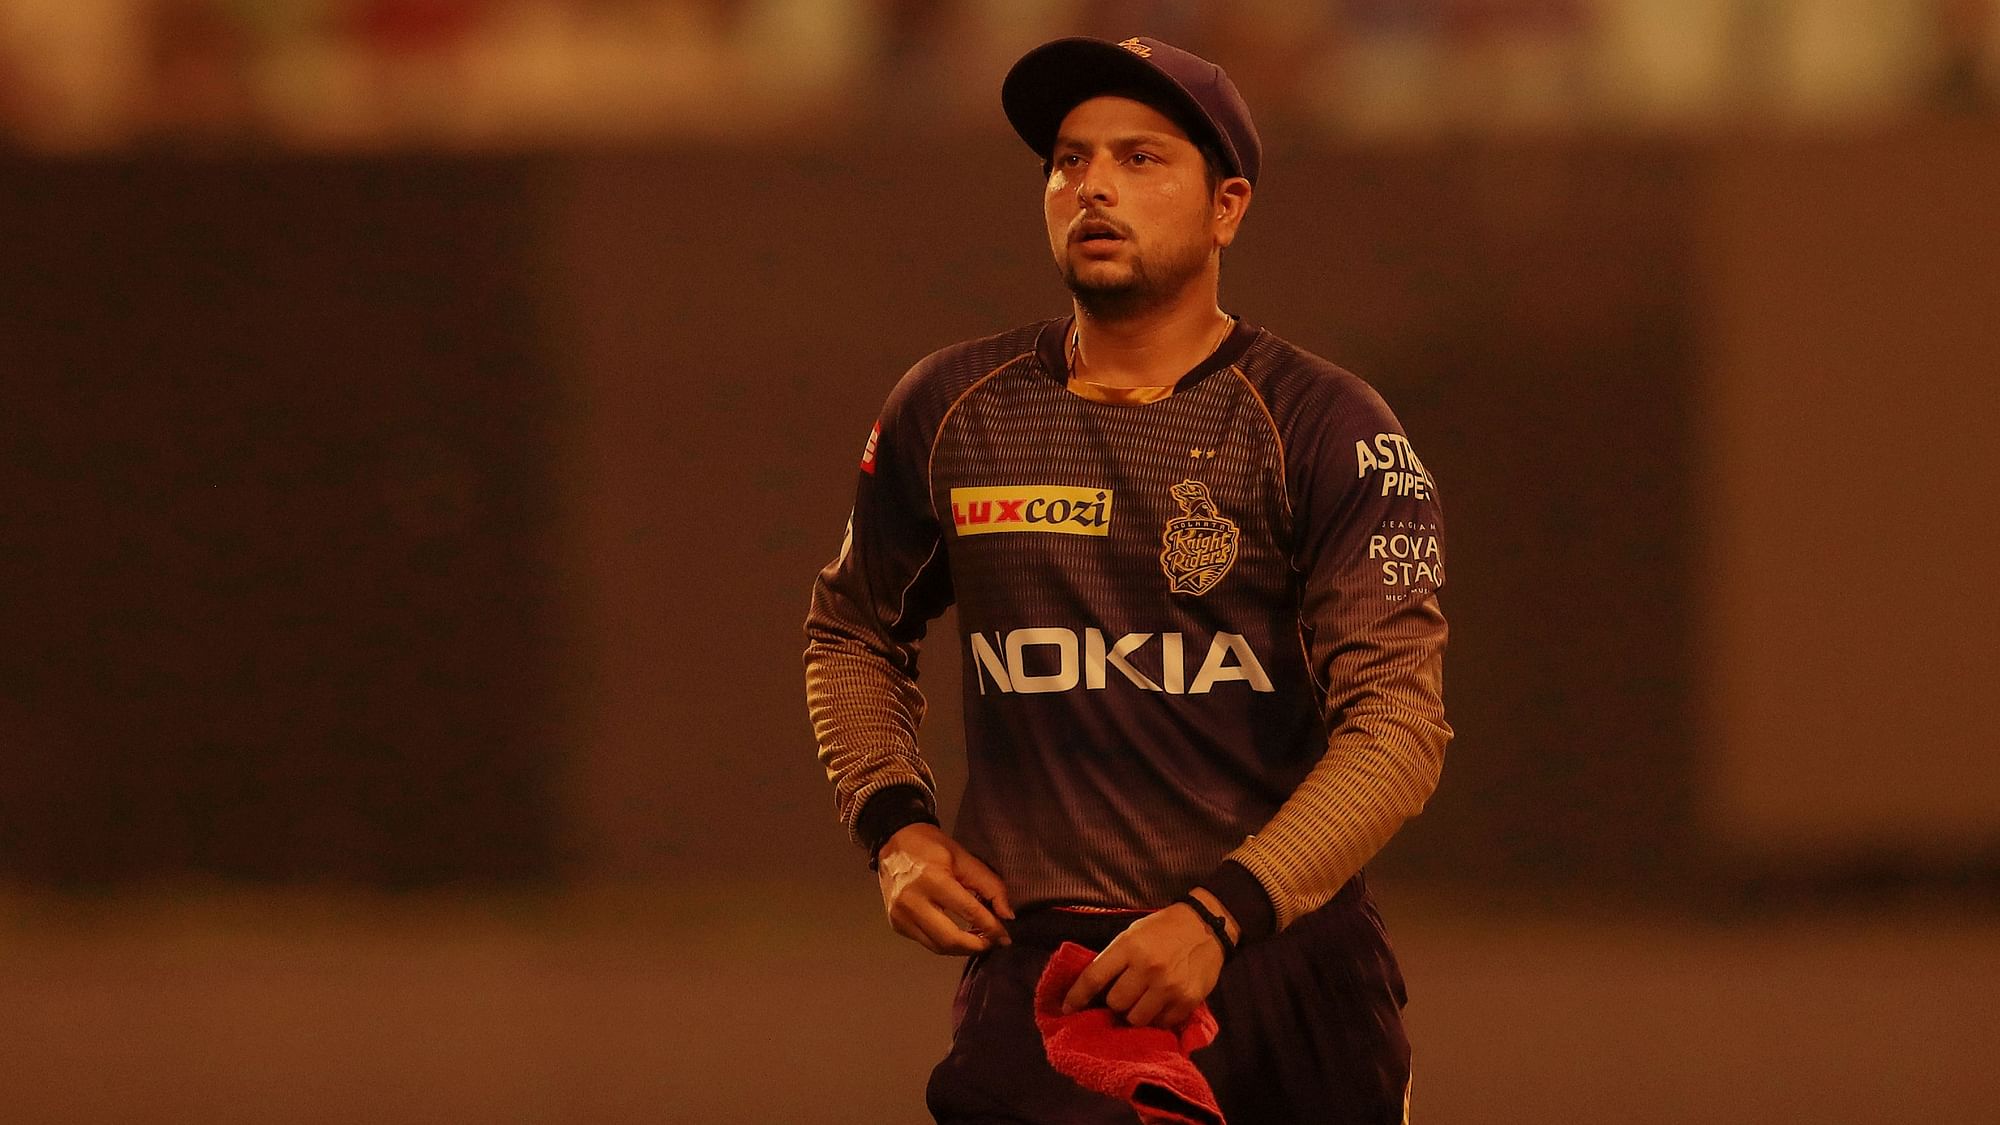 Never previously, not even in a completed IPL season, had Kuldeep Yadav gone wicket-less in six matches.